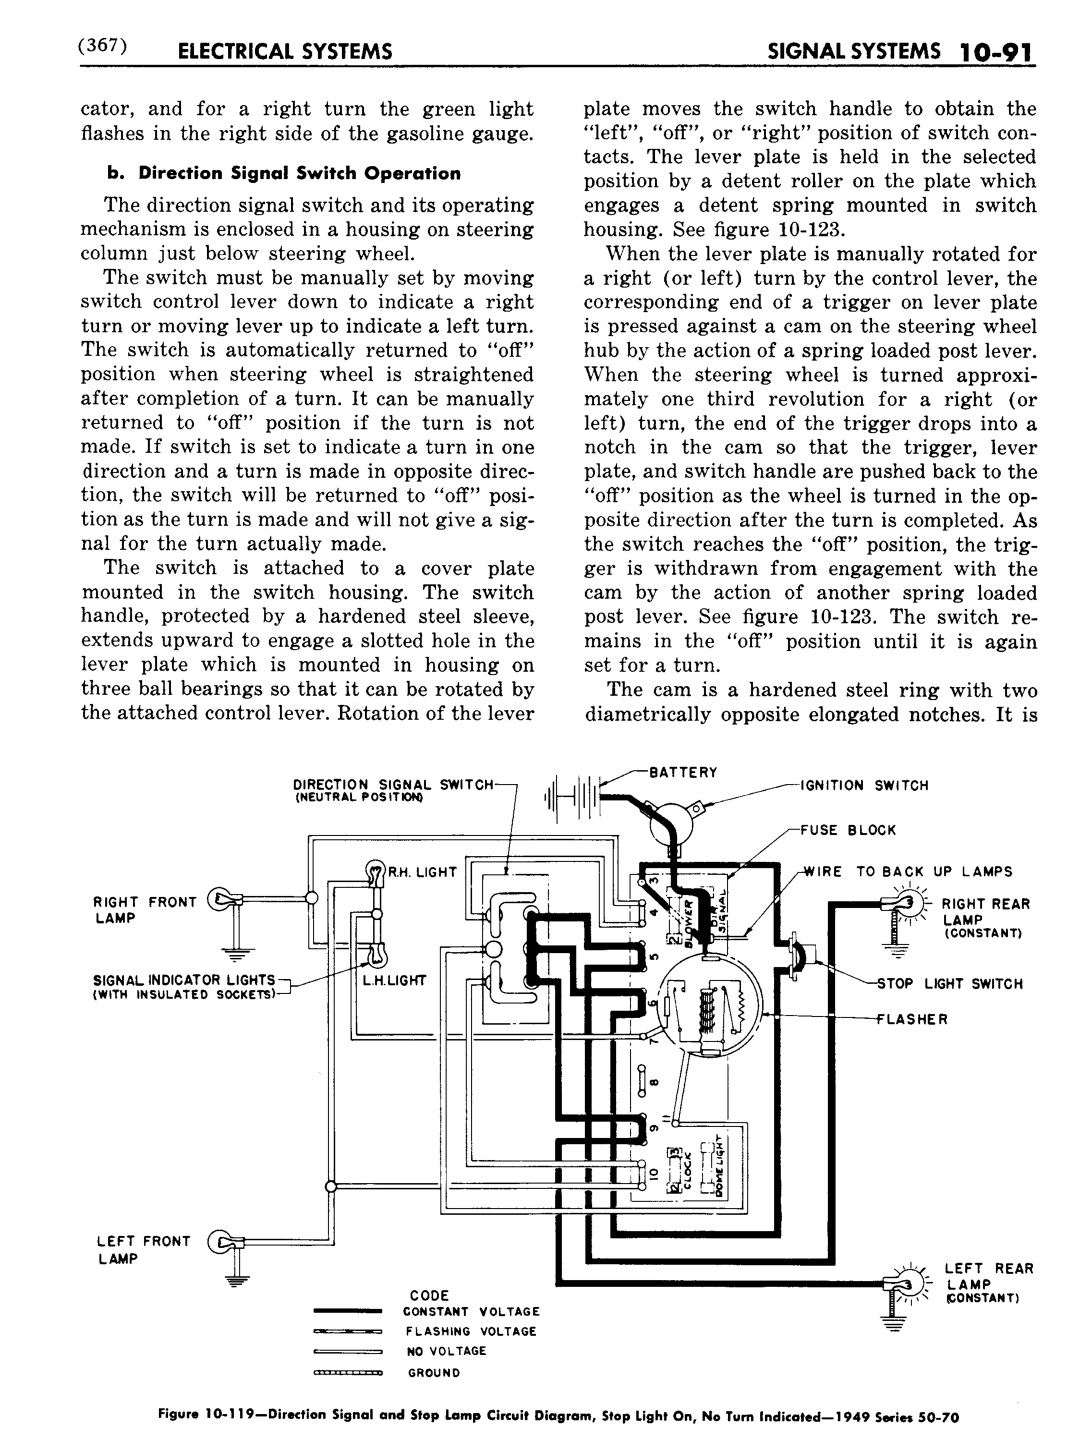 n_11 1948 Buick Shop Manual - Electrical Systems-091-091.jpg